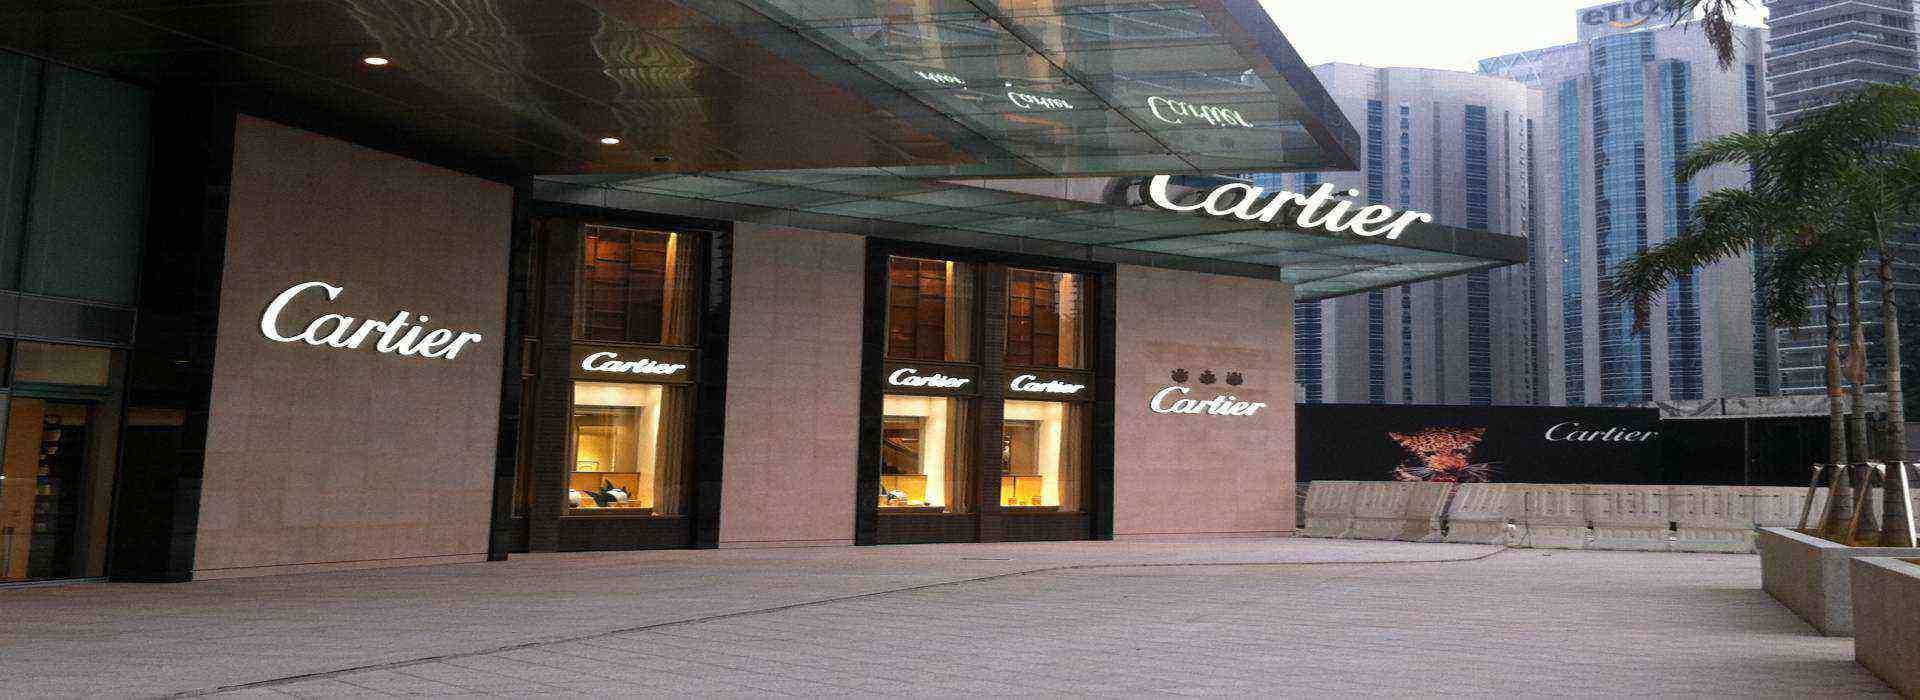 cartier malaysia outlet